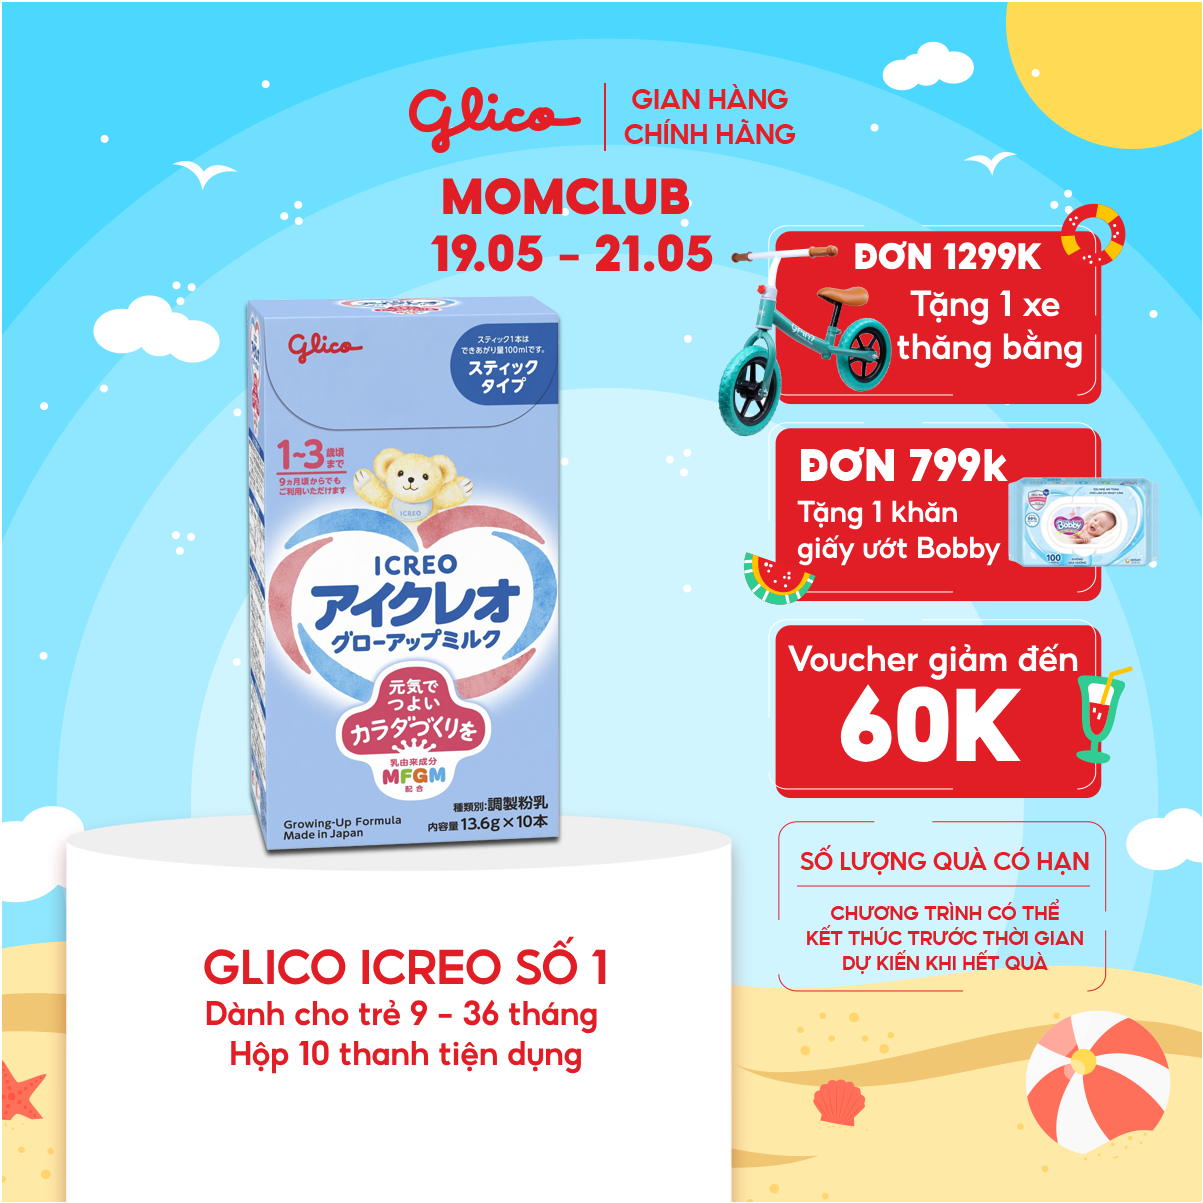 Sữa Glico Icreo Grow-Up (Icreo Số 1) Dạng Thanh Bột Tiện Dụng  - Hộp 10 x 136g/thanh